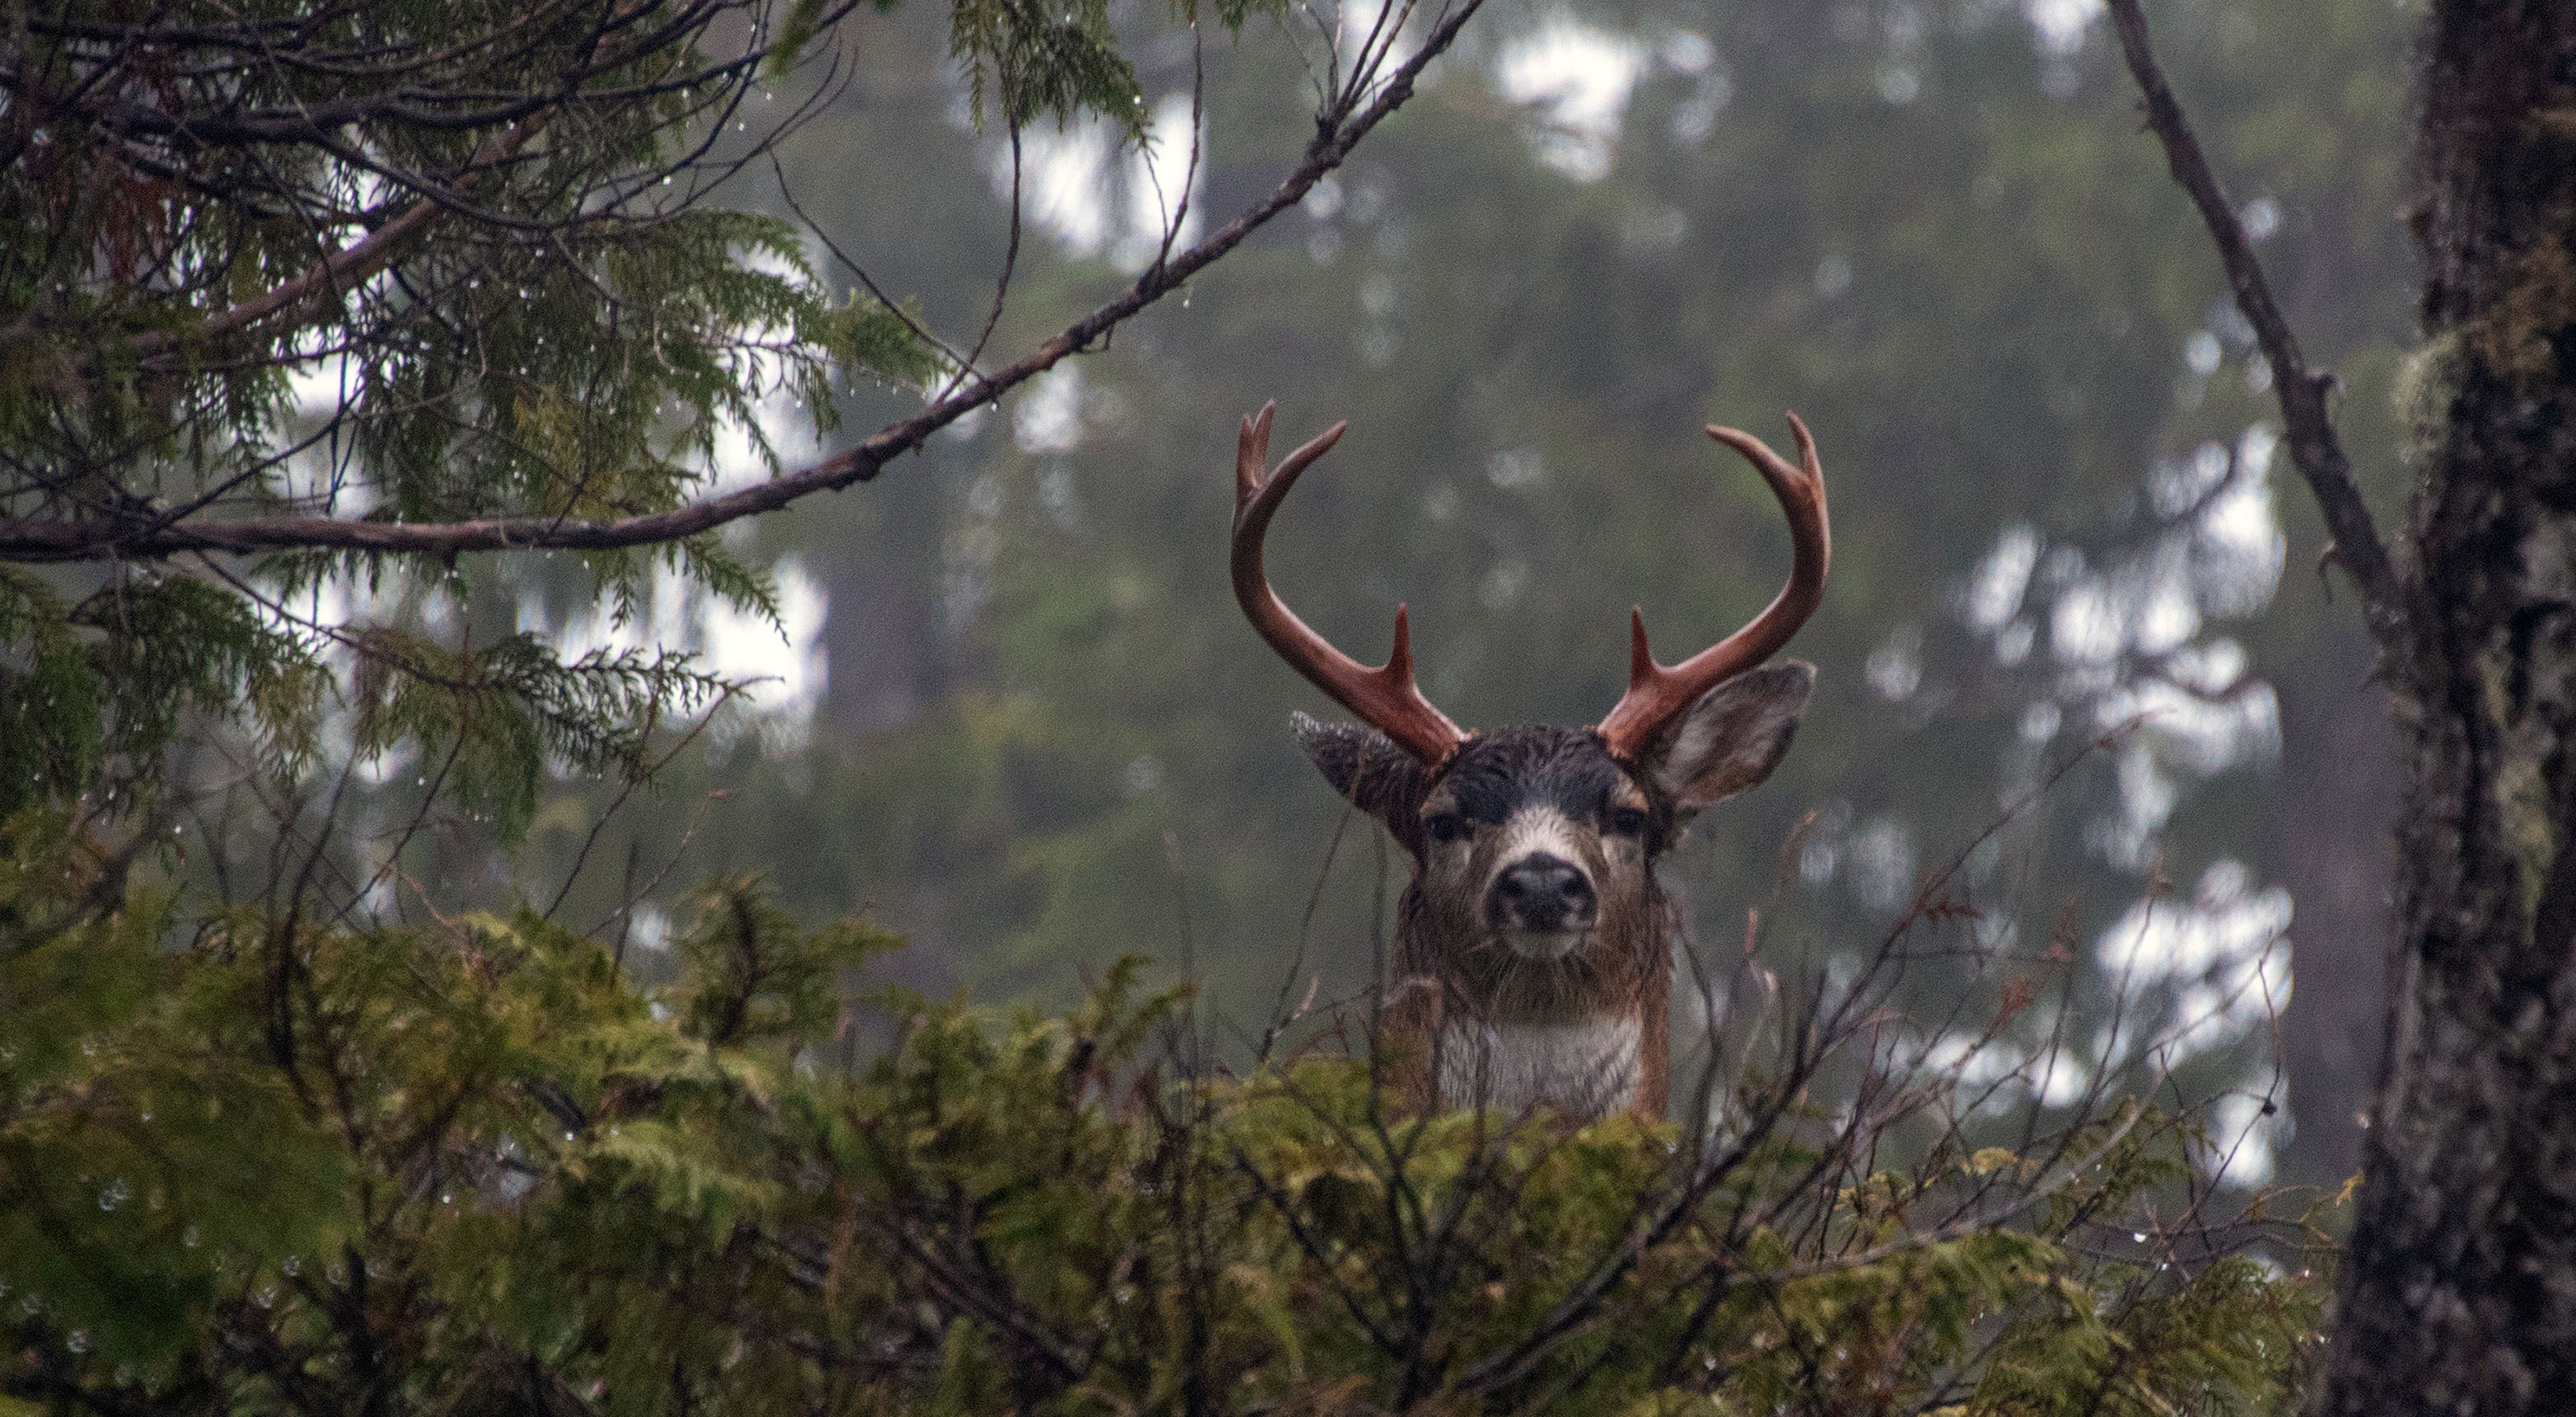 A male Sitka black-tailed deer pops his head up above dense foliage in the forest and looks at the camera.